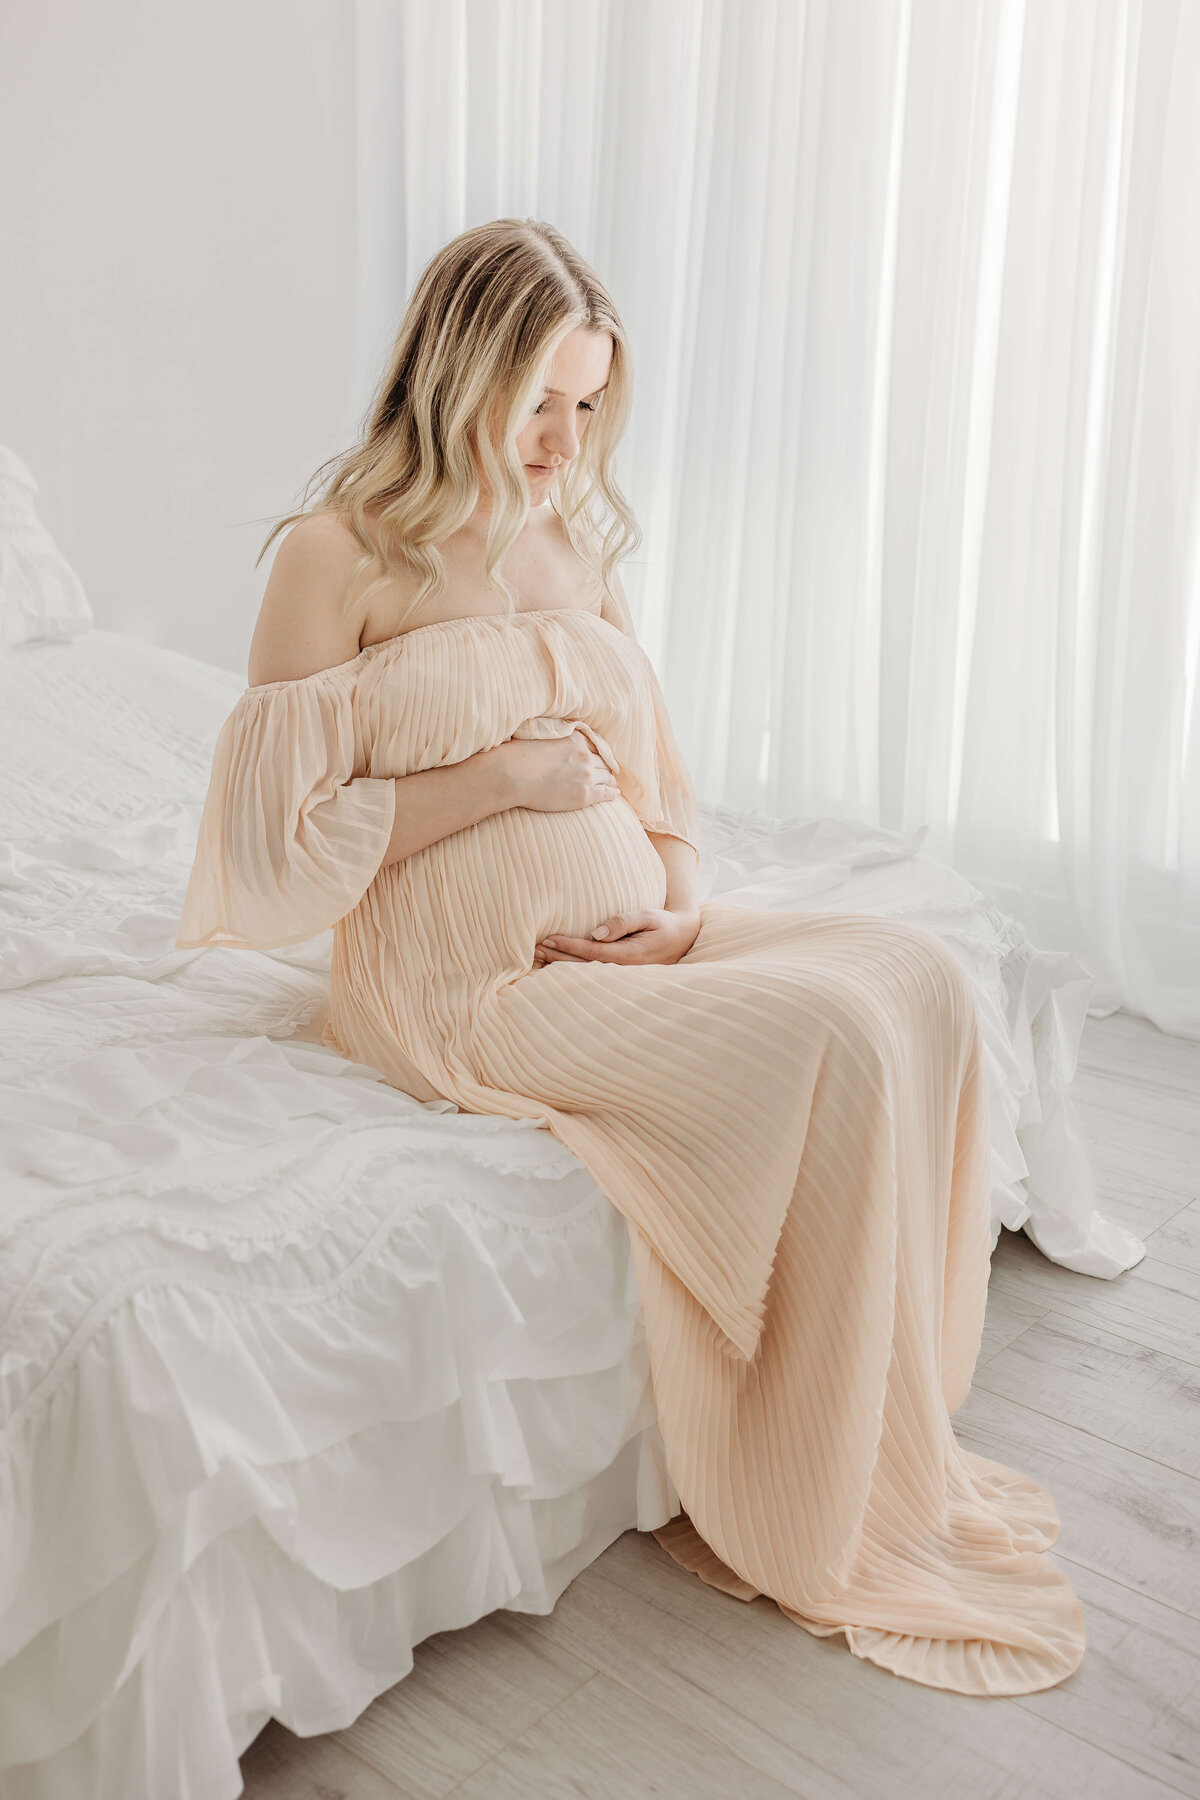 Woman sitting on white bed and pregnant for photoshoot